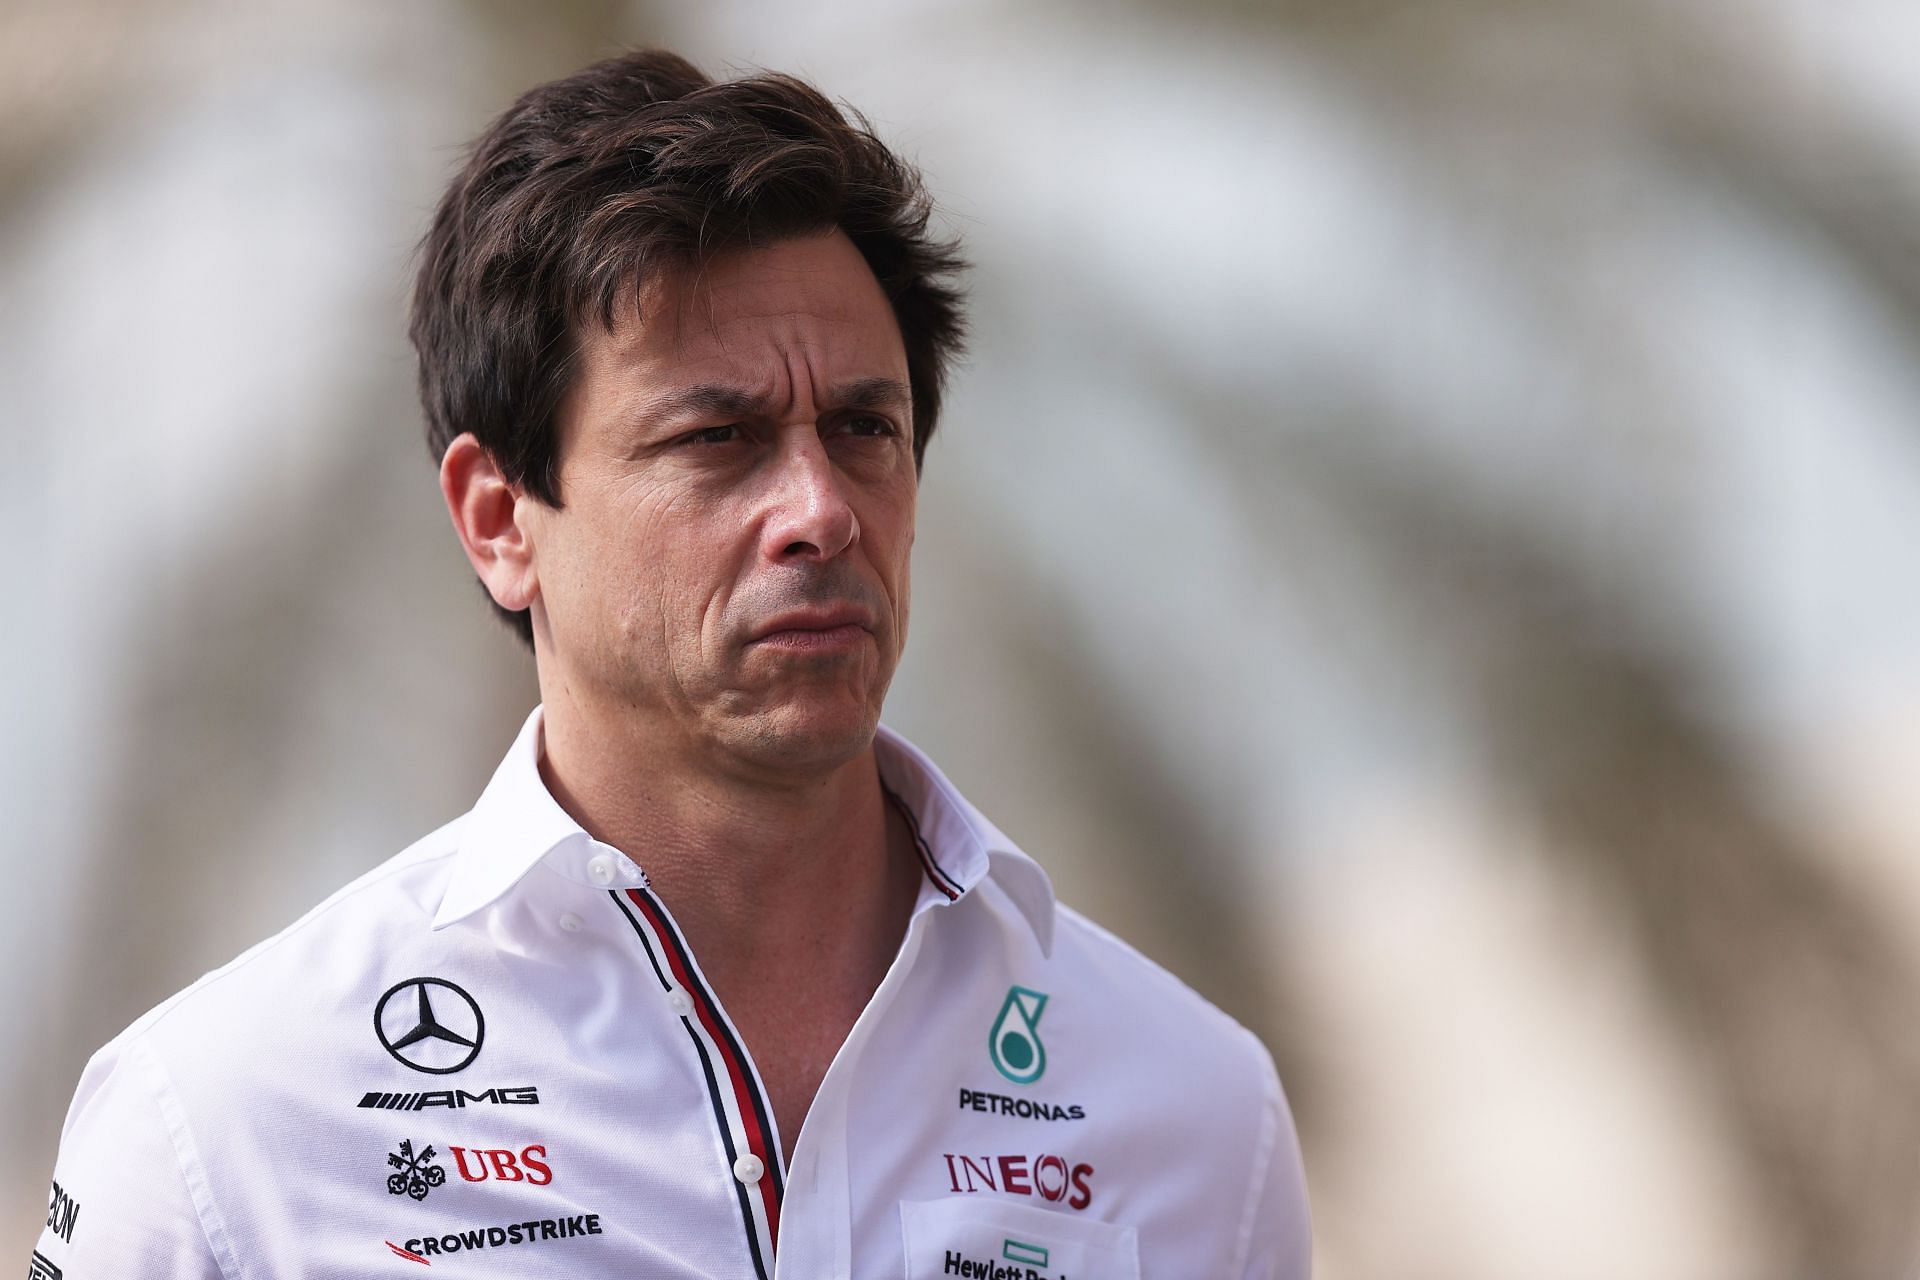 Toto Wolff was not happy with the SC restart procedure in Abu Dhabi GP